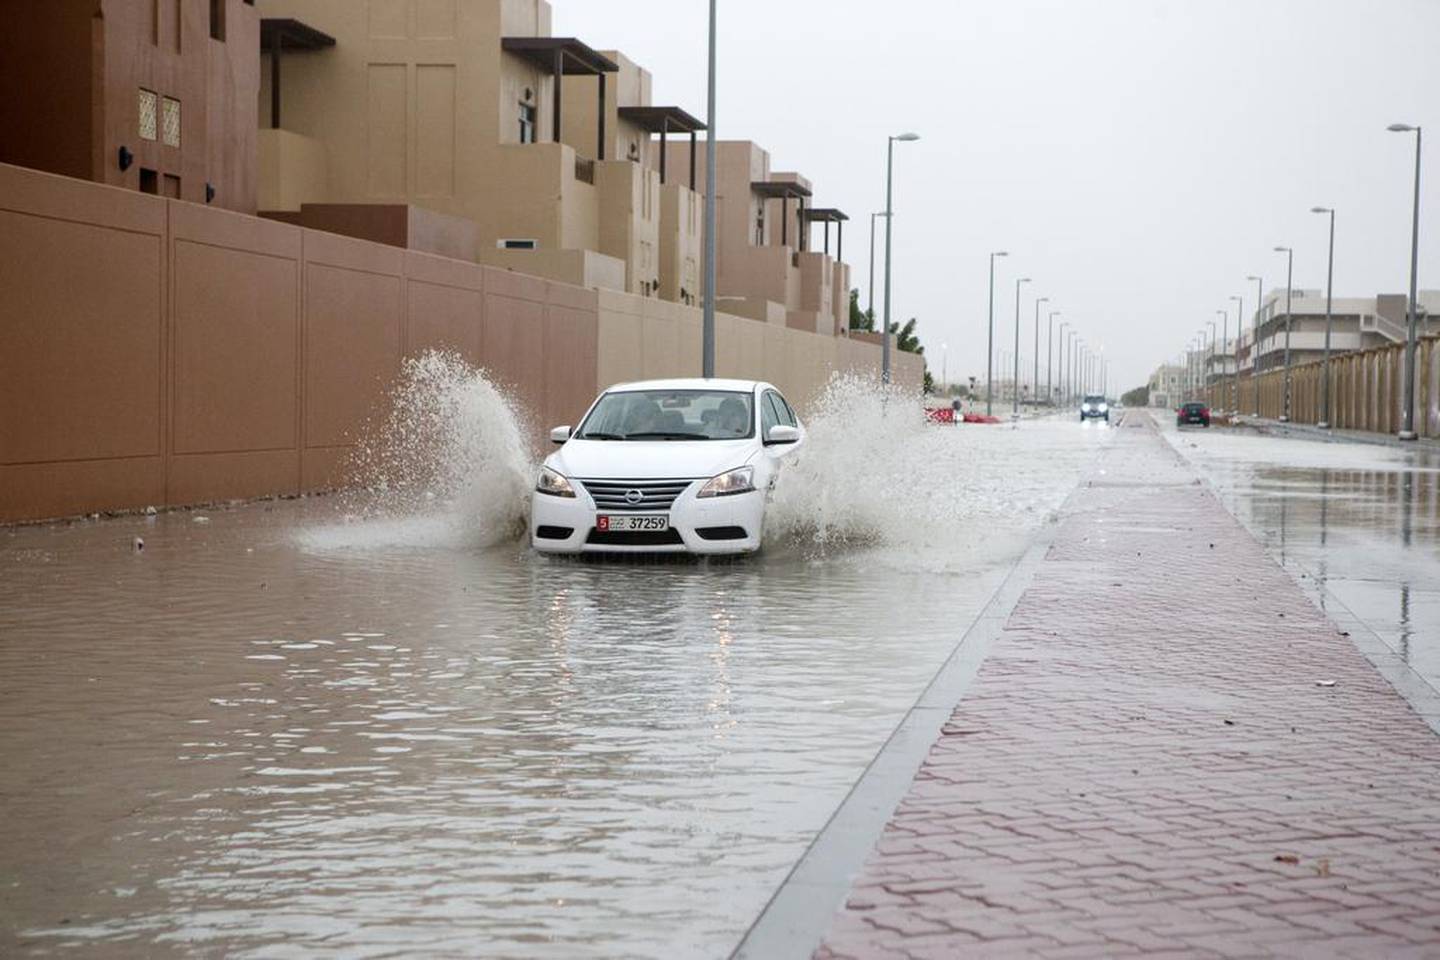 A car drives through a flooded street in Khalifa City of Abu Dhabi during the great storm of March 9, 2016. Christopher Pike / The National